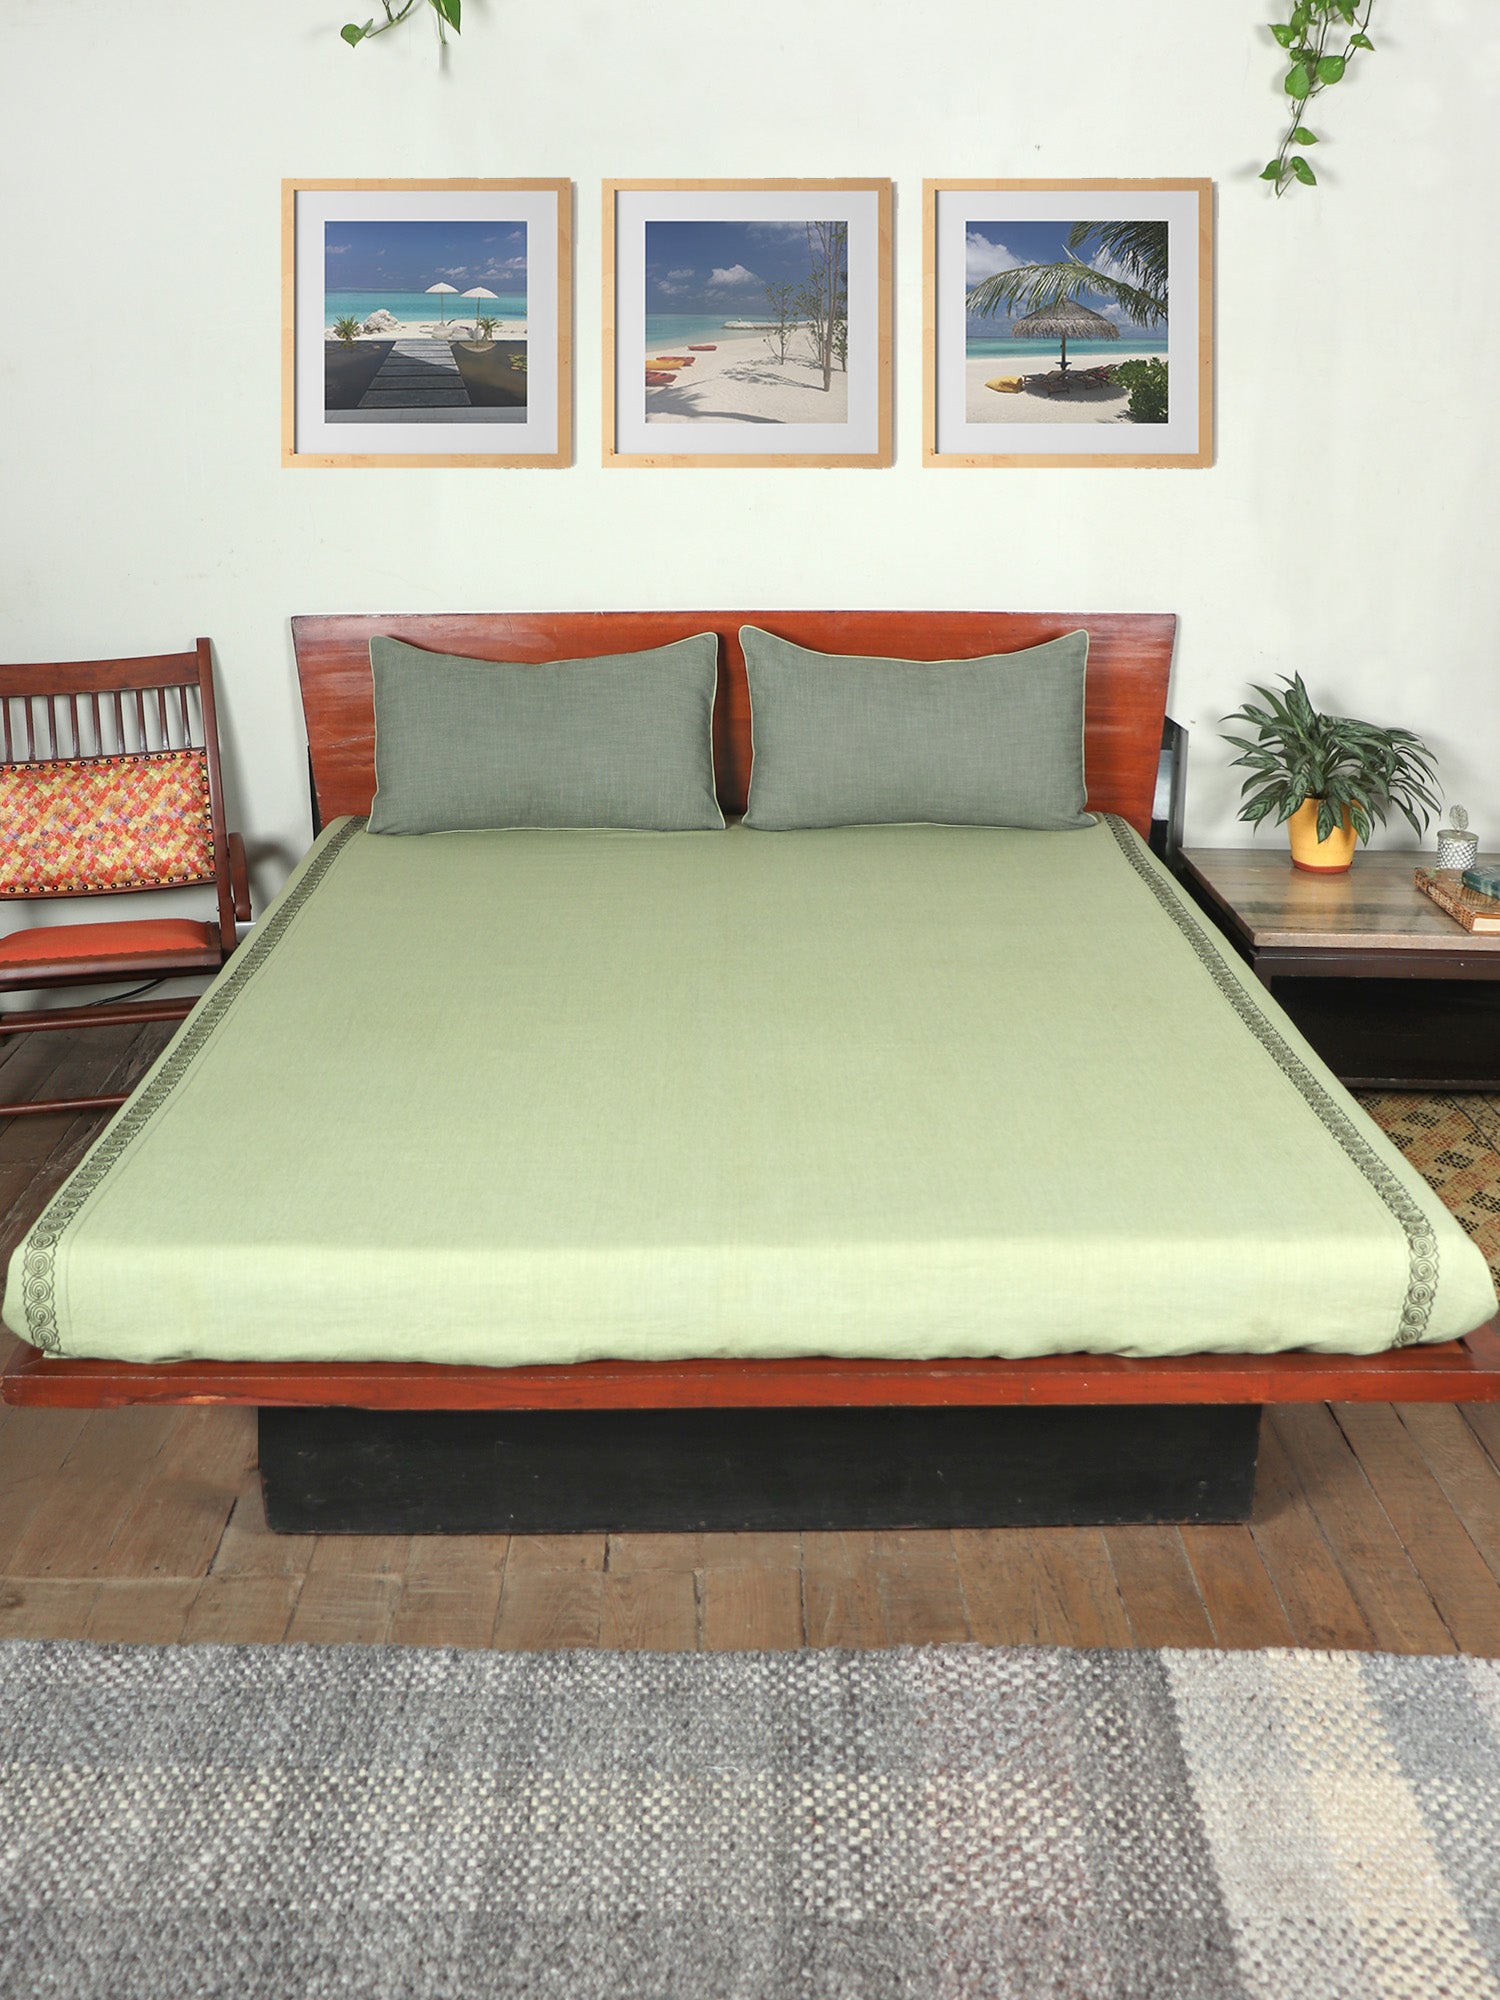 Embroidered Bedcover for Double Bed | Circular Aari Embroidery - Queen Size - Cotton Blend | Light Green Color| Bed Cover 90 x 108inches, Pillow 17x27in